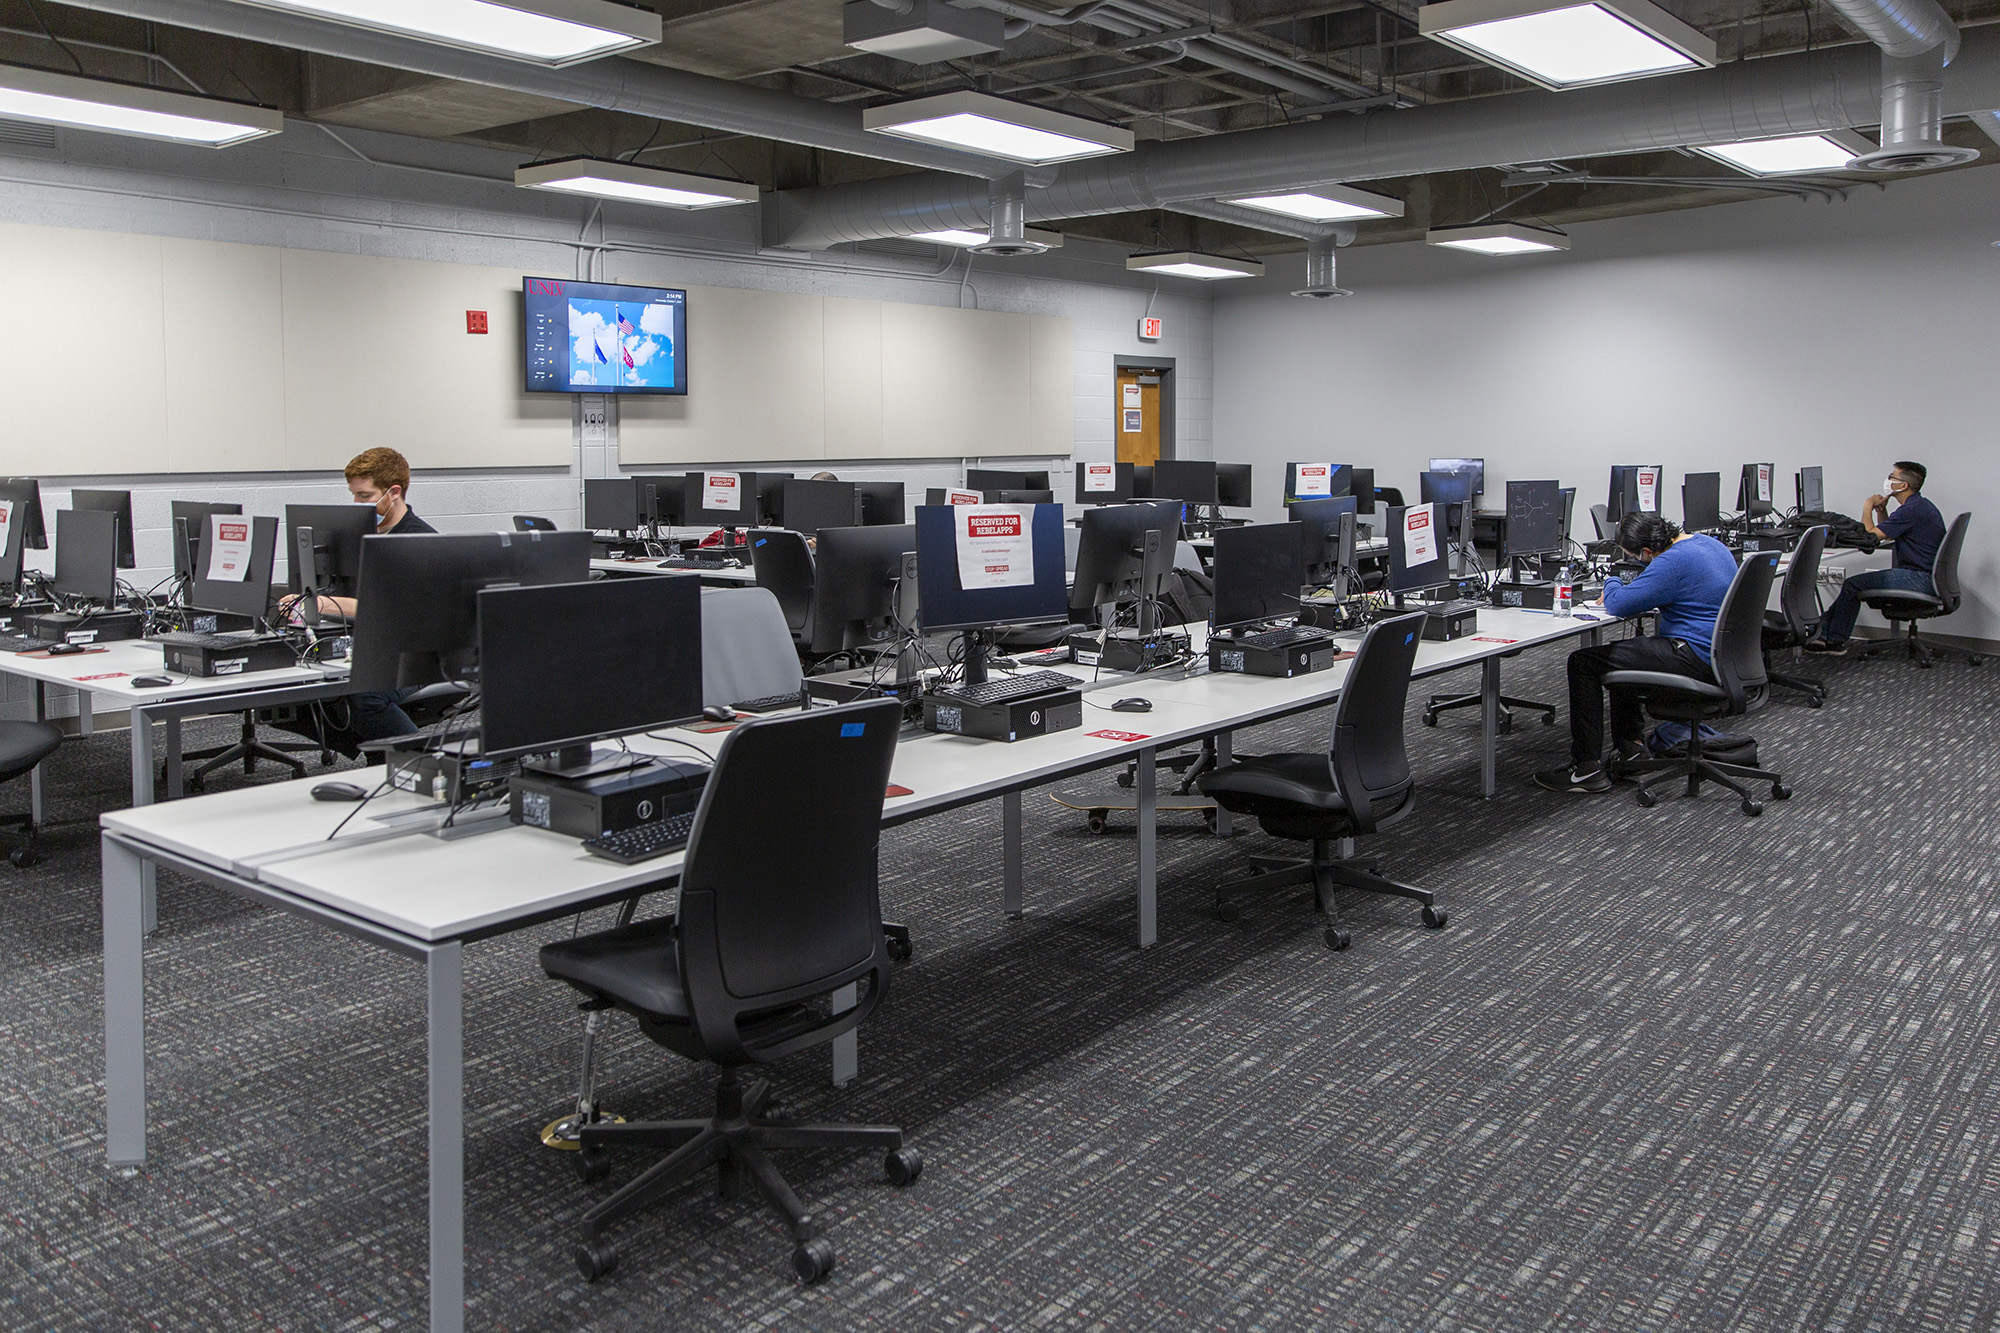 A socially distanced computer lab with a smattering of students.